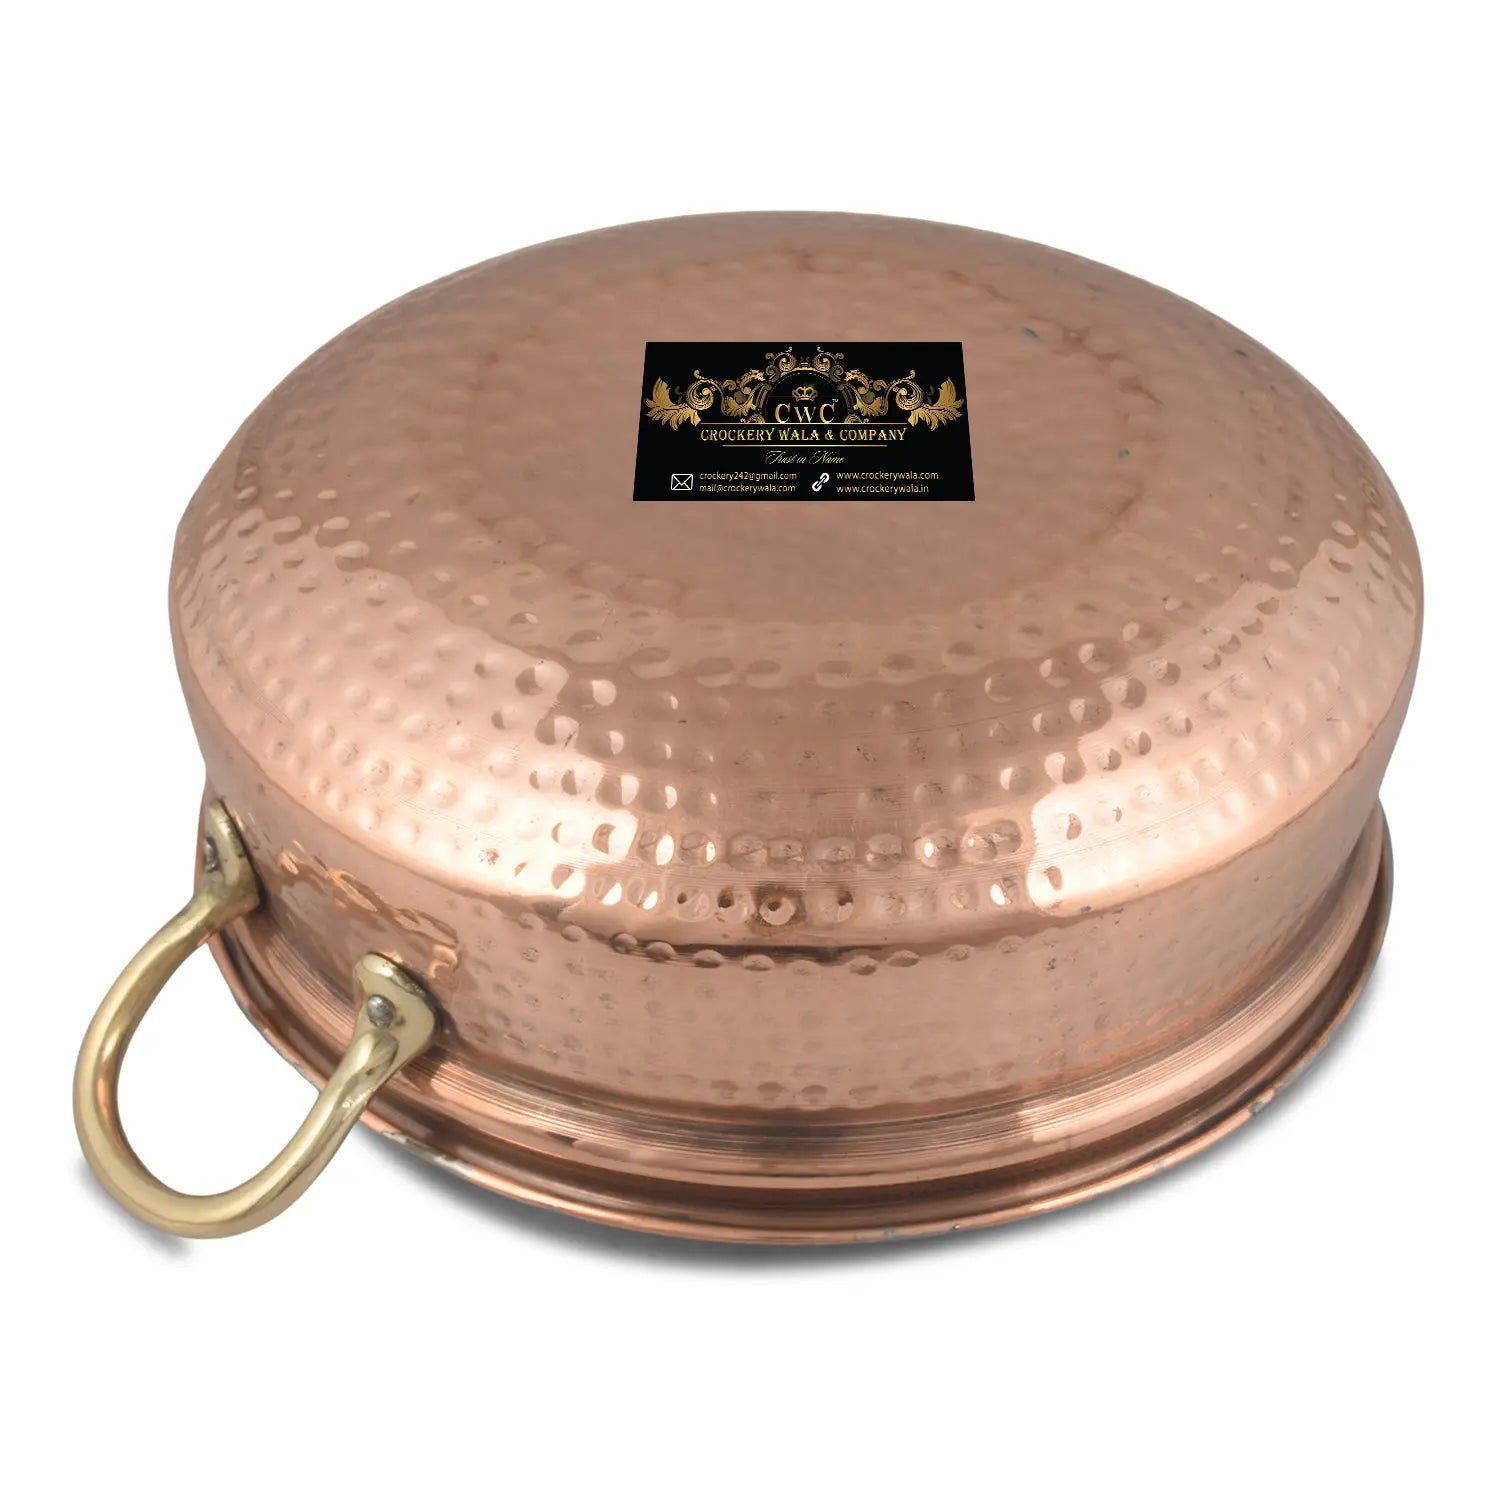 Crockery Wala And Company Pure Copper Kalai Handi For Serving & Cooking Pure Copper Hammered Handi With Brass Handles || 9" Inches - CROCKERY WALA AND COMPANY 